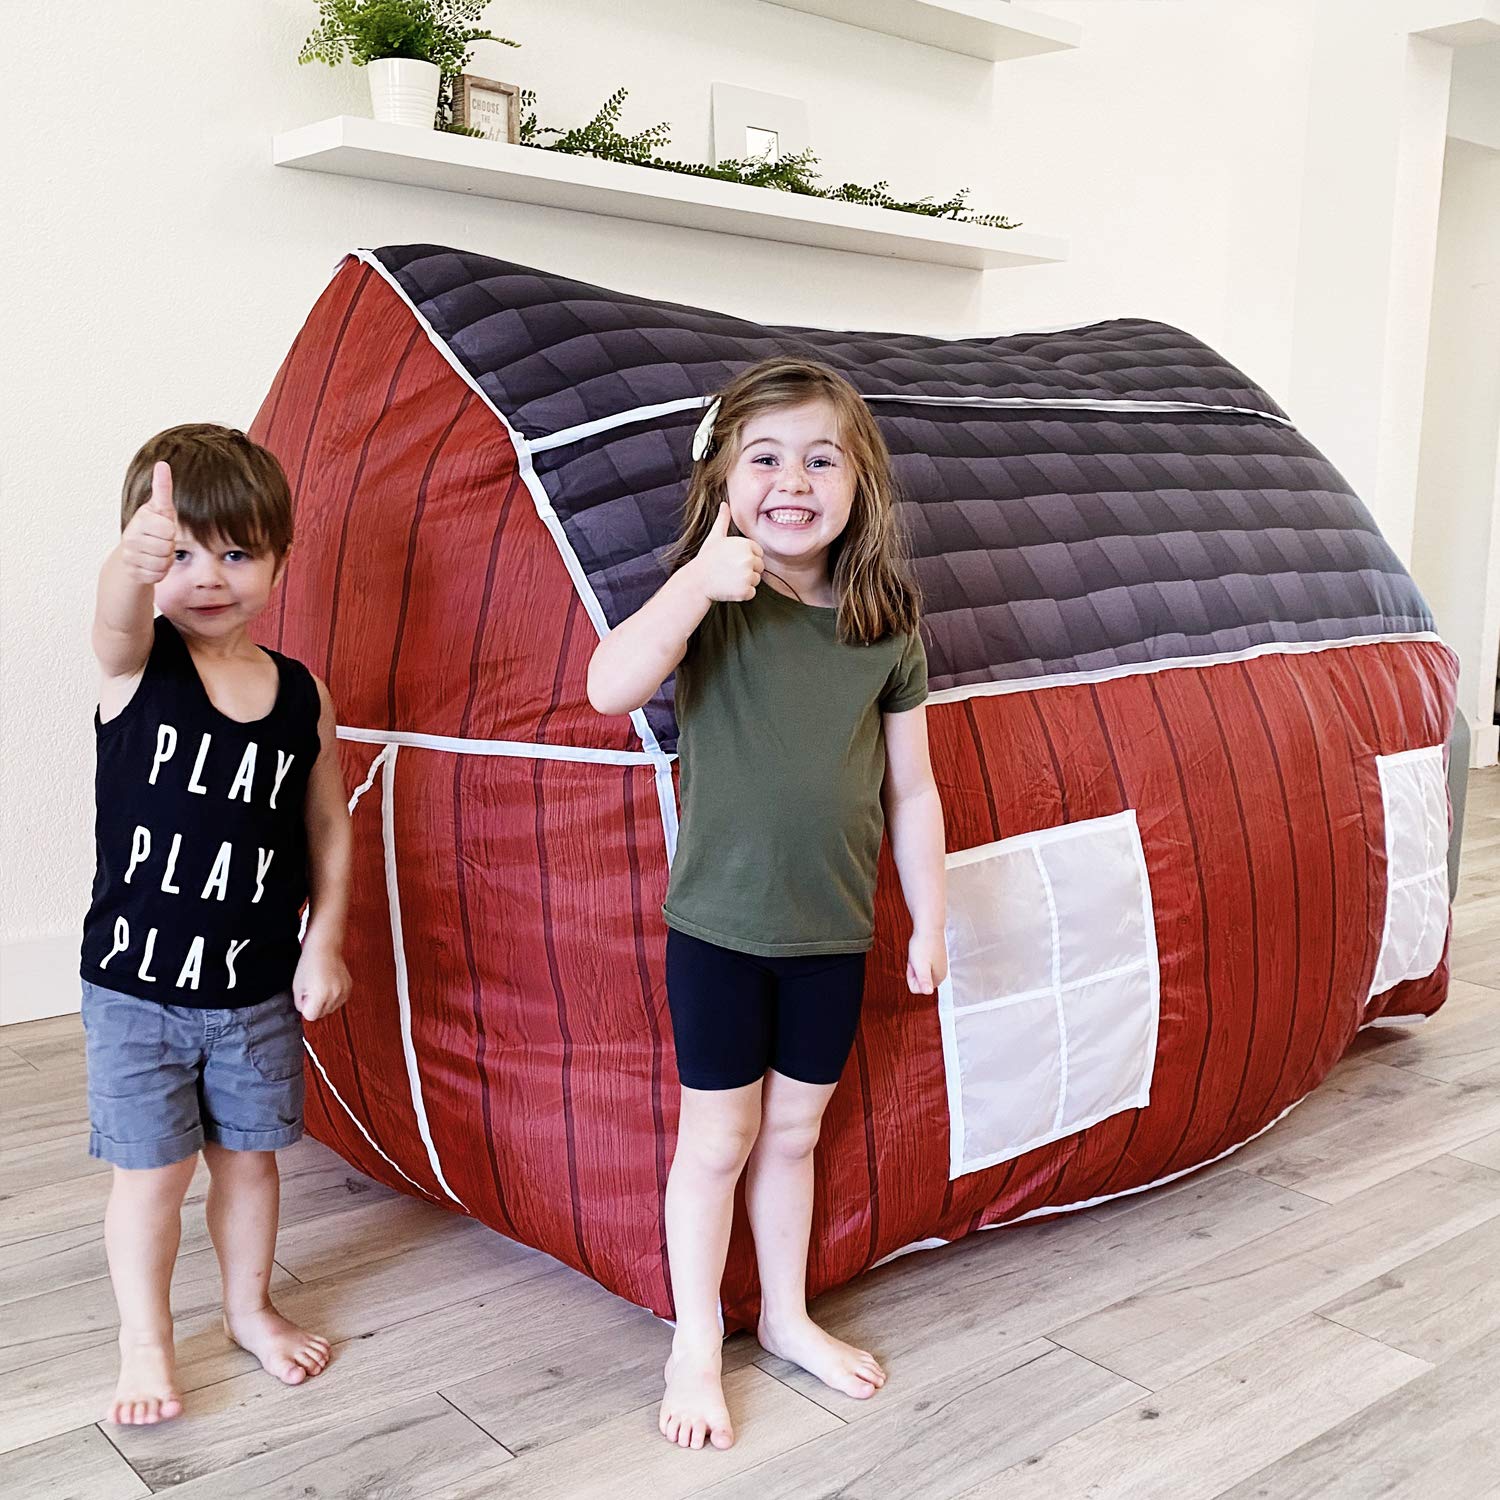 The Original AirFort Build A Fort in 30 Seconds, Inflatable Fort for Kids (Starry Night)